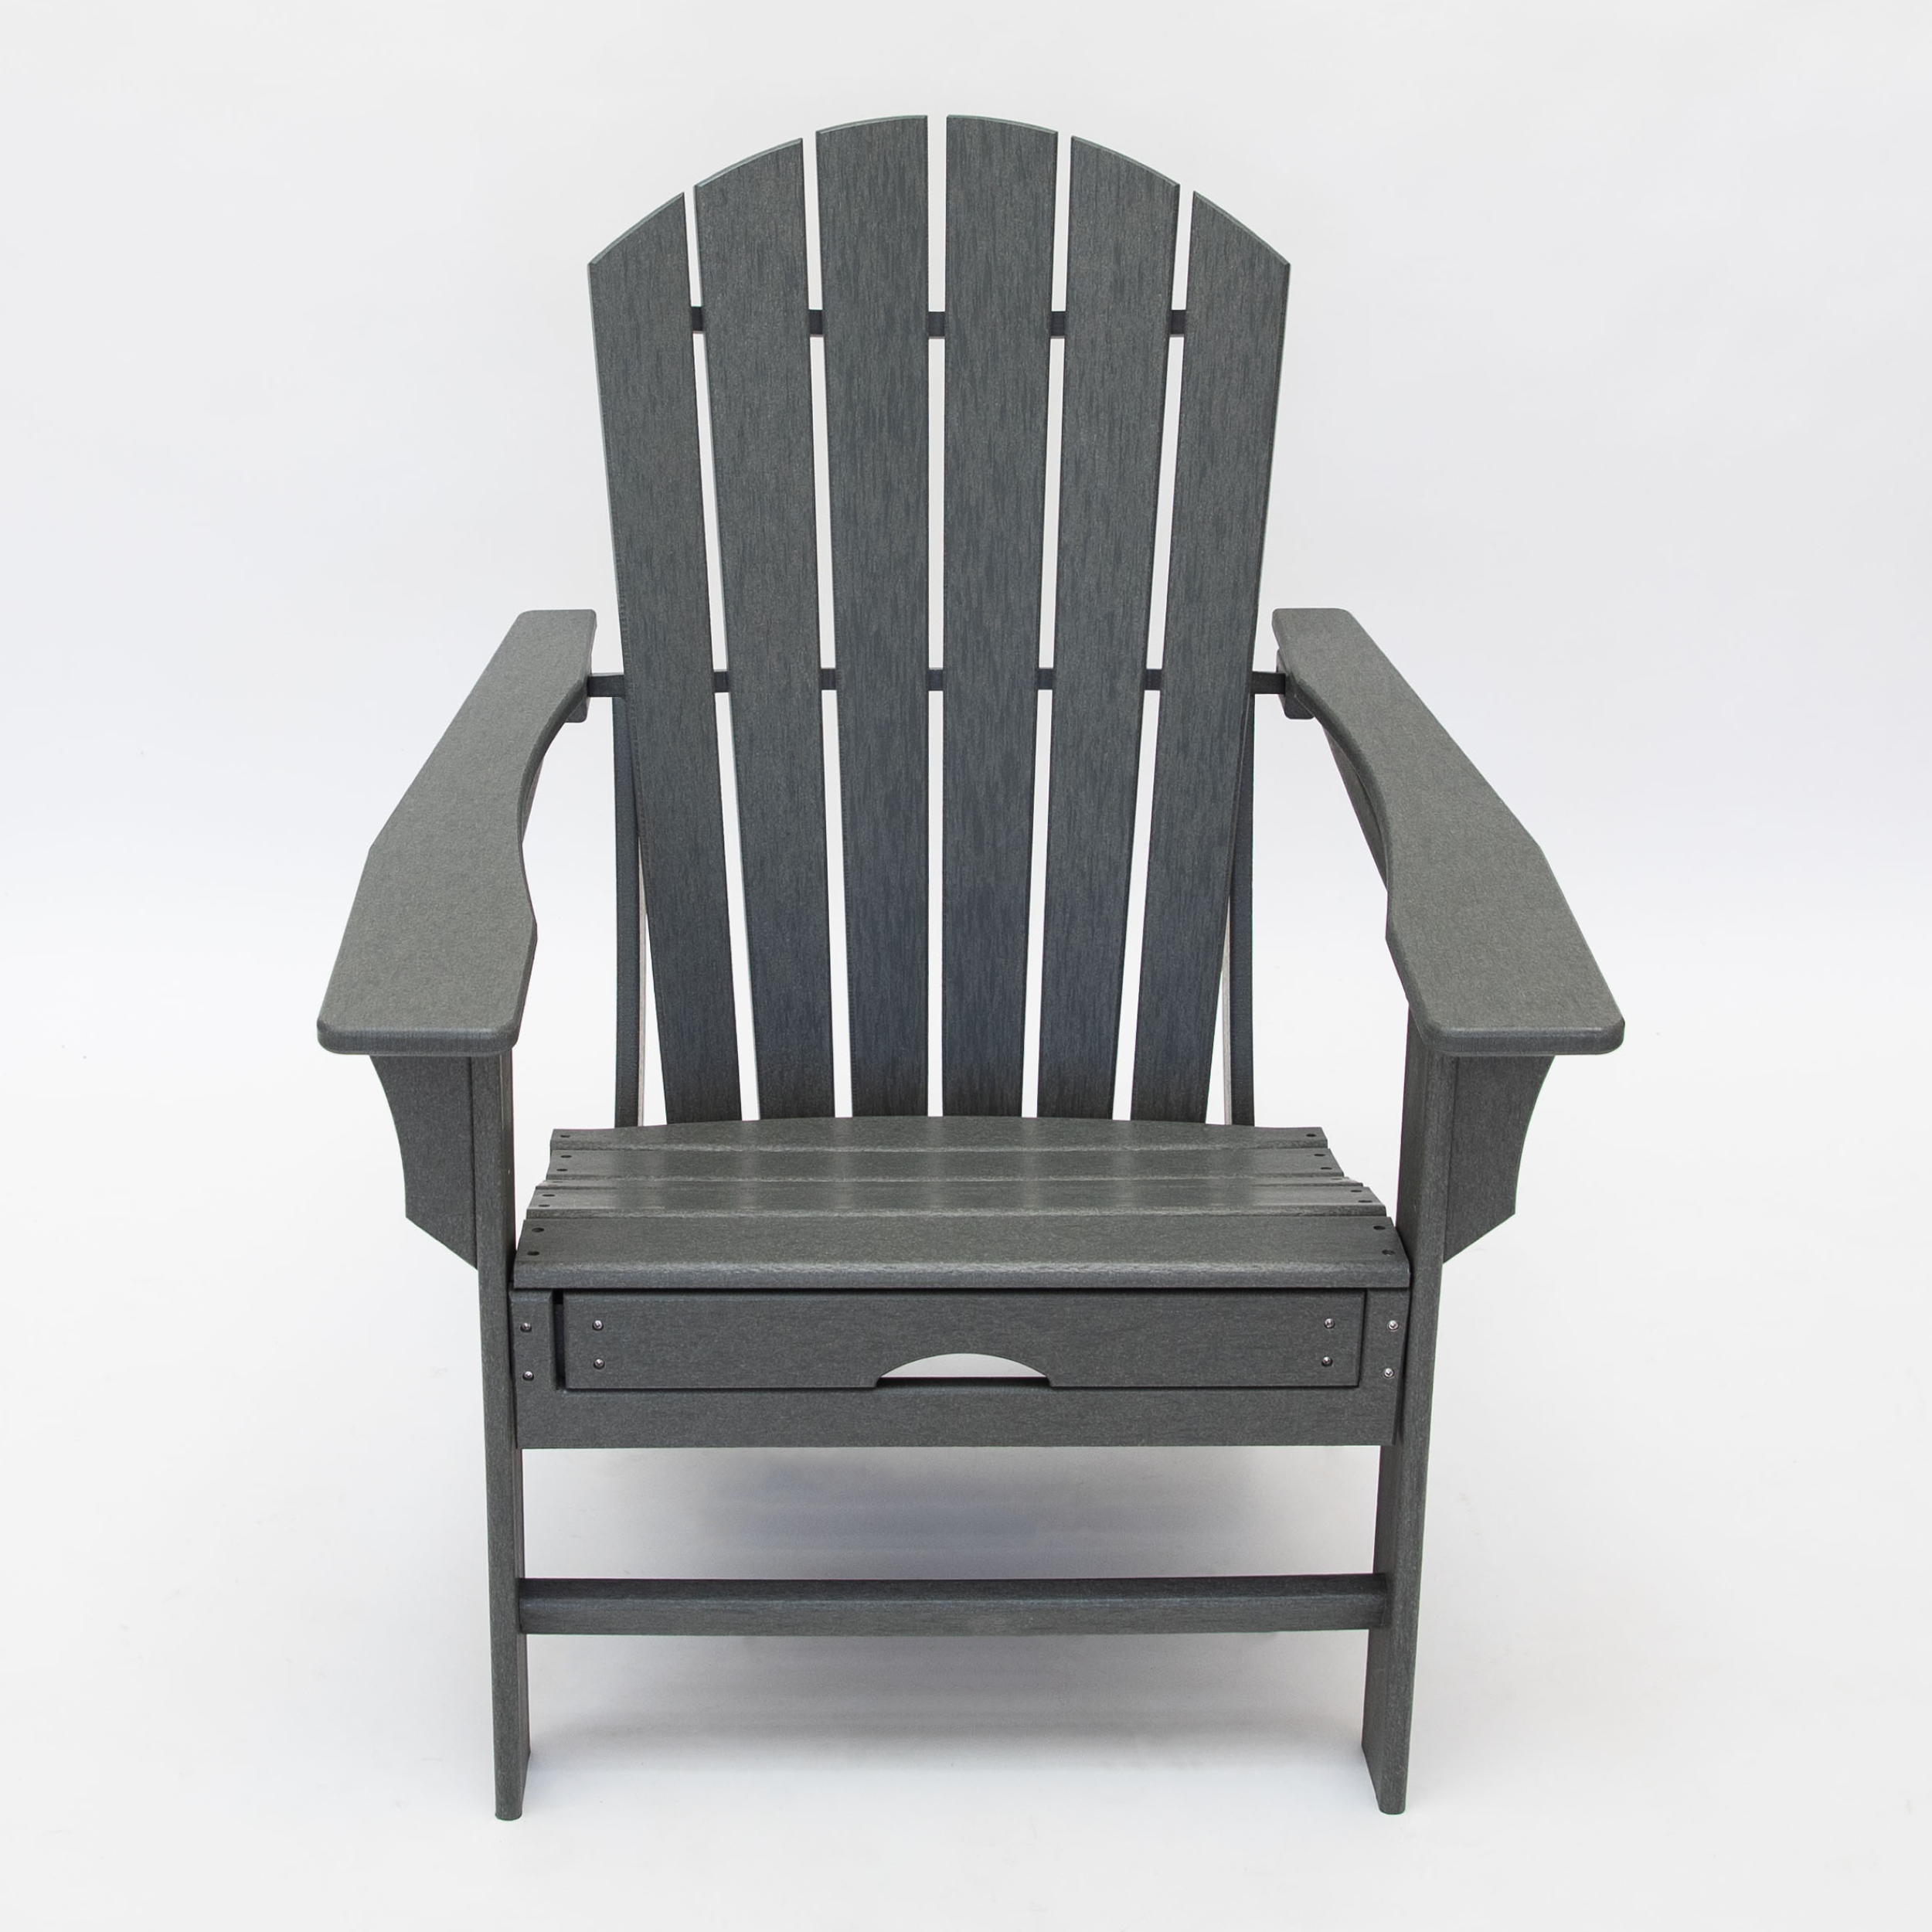 LuXeo - Hampton HDPE Recycled Plastic Outdoor Patio Adirondack Chair with Hideaway Ottoman